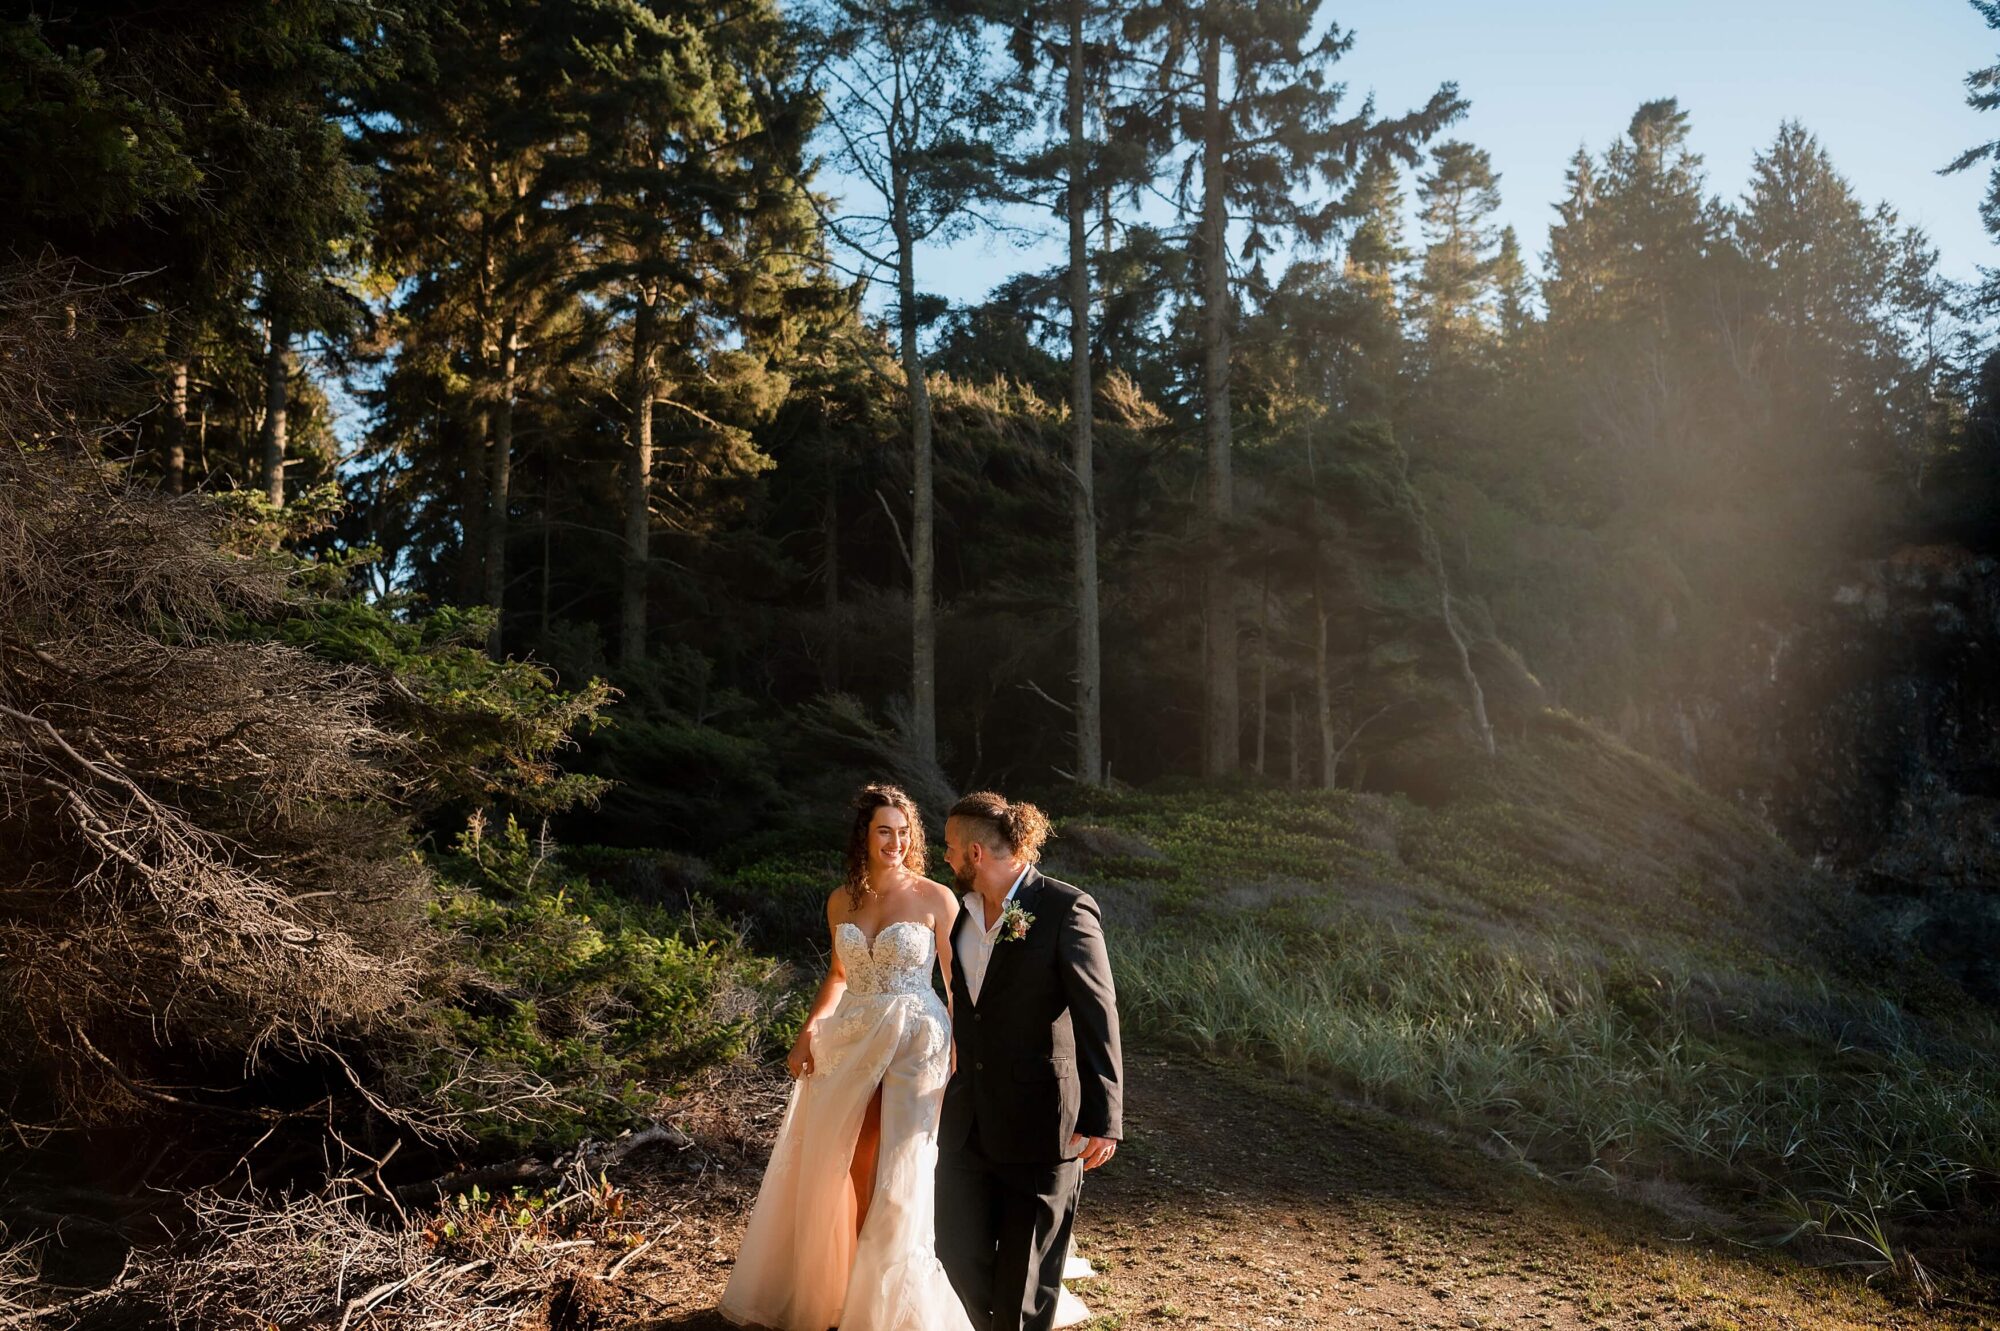 Bride and groom in the forest at sunset on the Olympic Peninsula